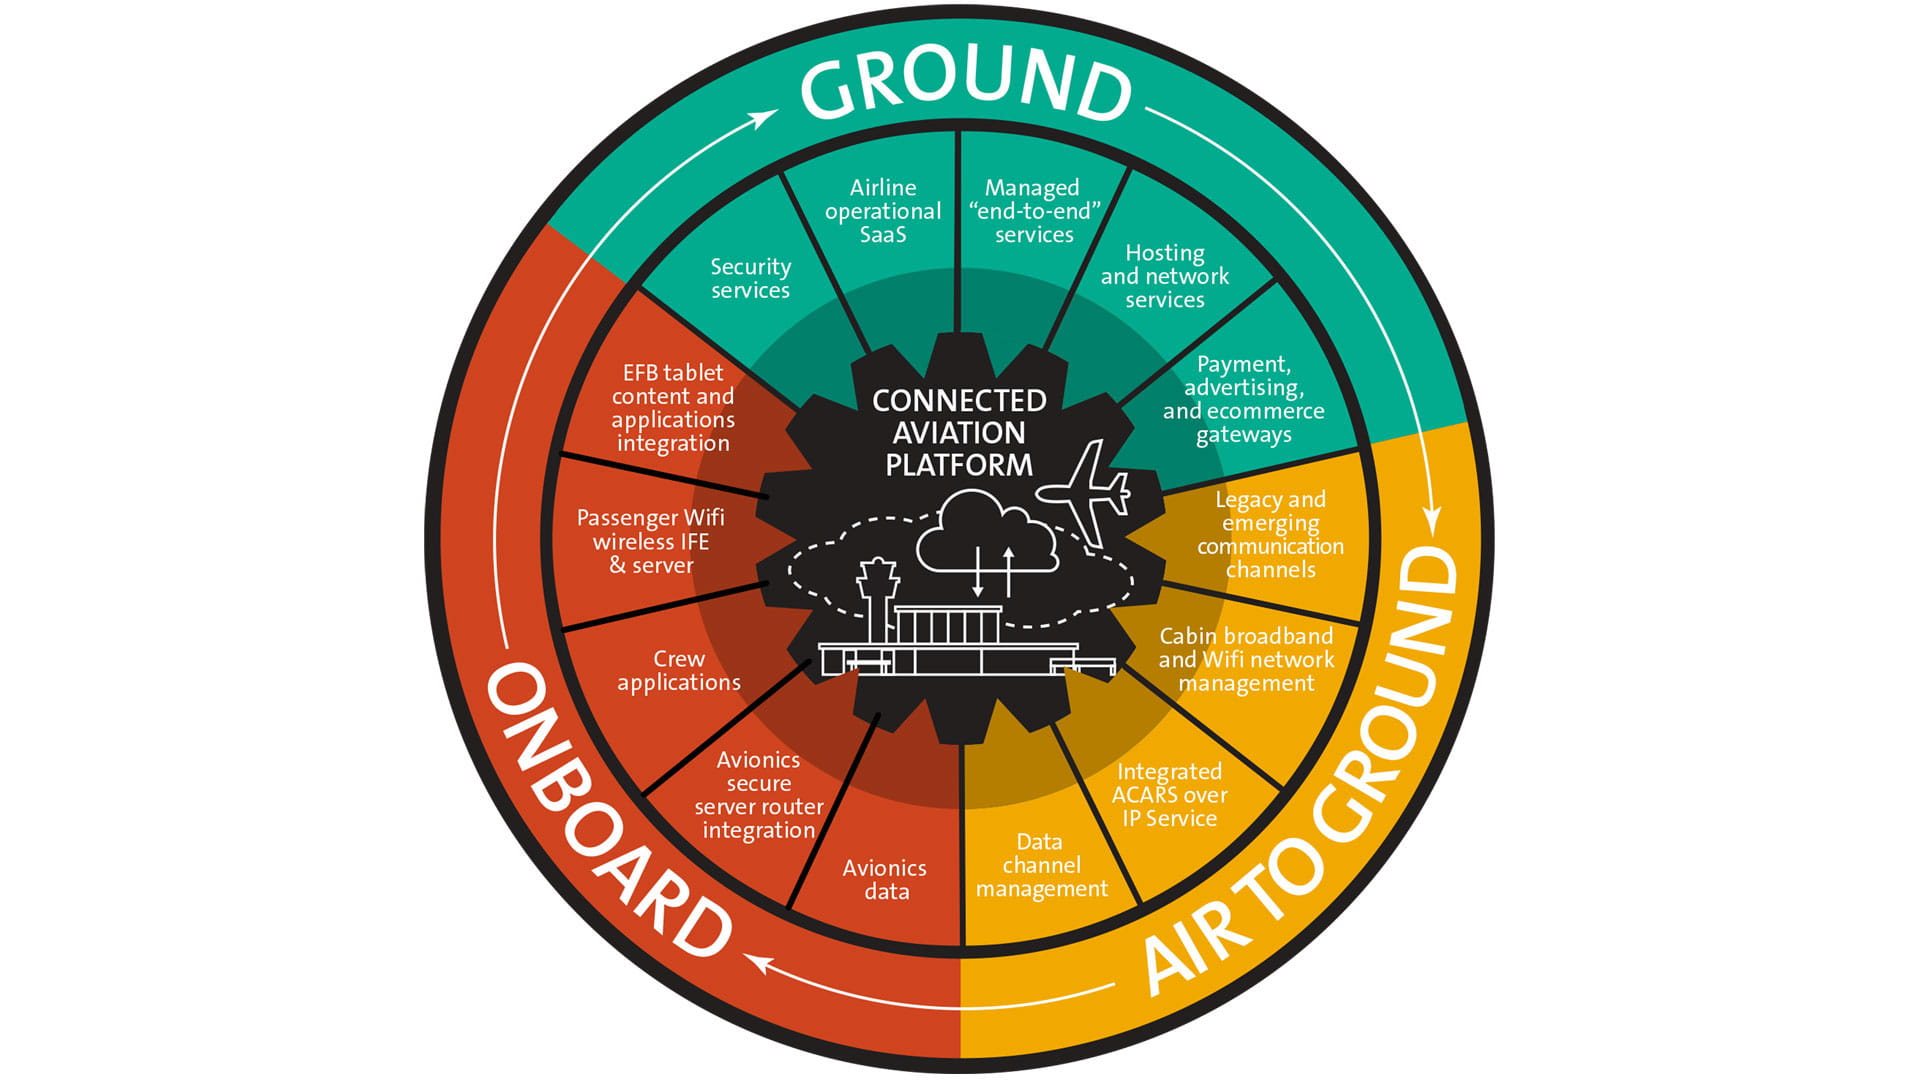 Infographic depicting the stages of the connected aviation platform lifecycle: Ground, air to ground, and onboard